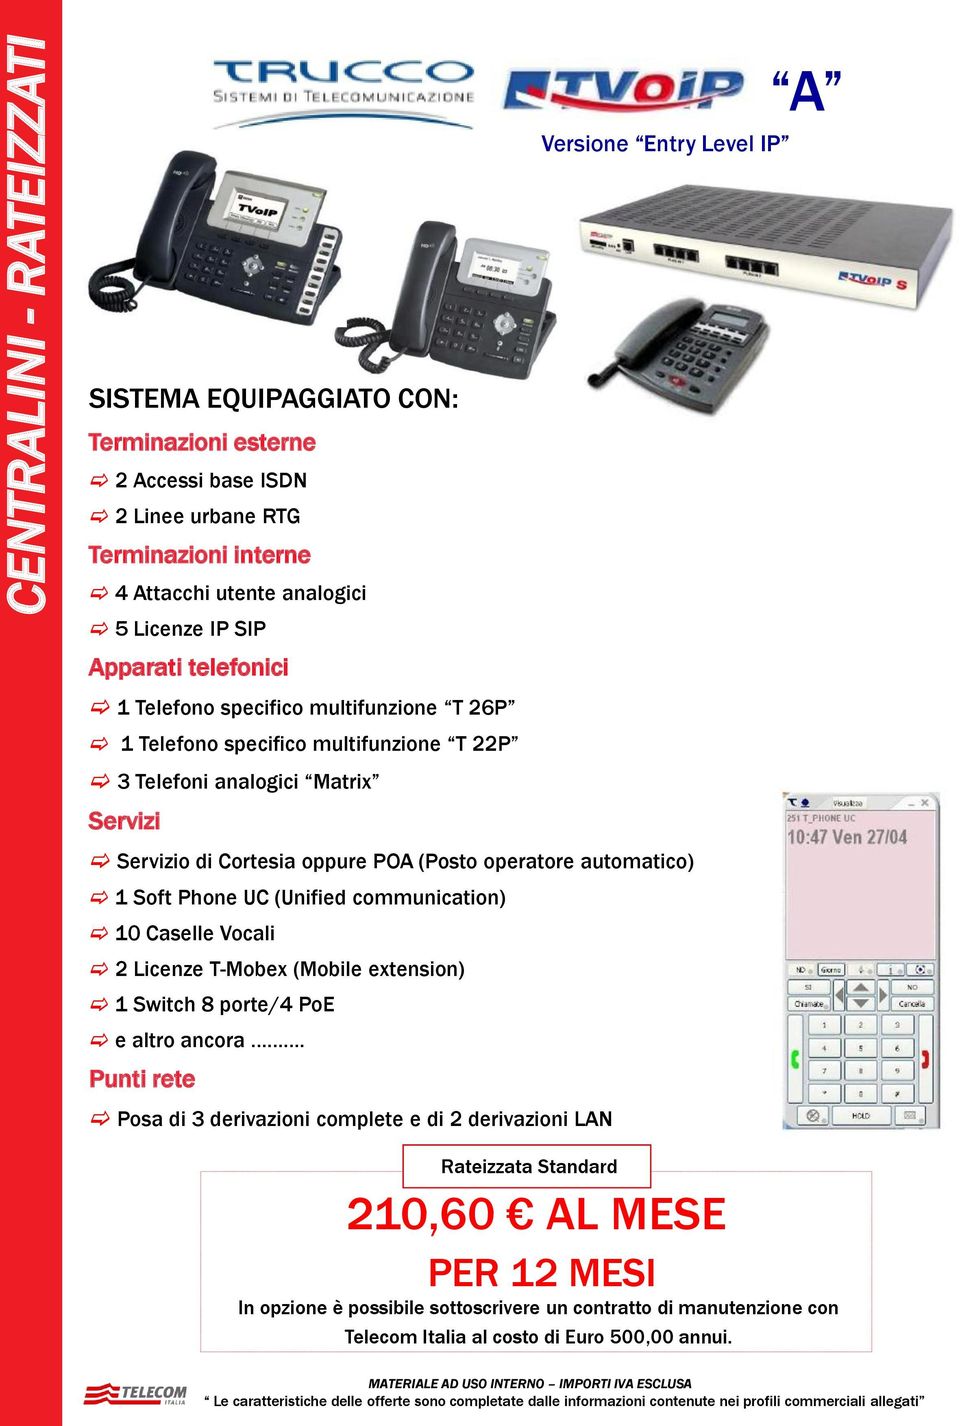 automatico) 1 Soft Phone UC (Unified communication) 10 Caselle Vocali 2 Licenze T-Mobex (Mobile extension) 1 Switch 8 porte/4 PoE